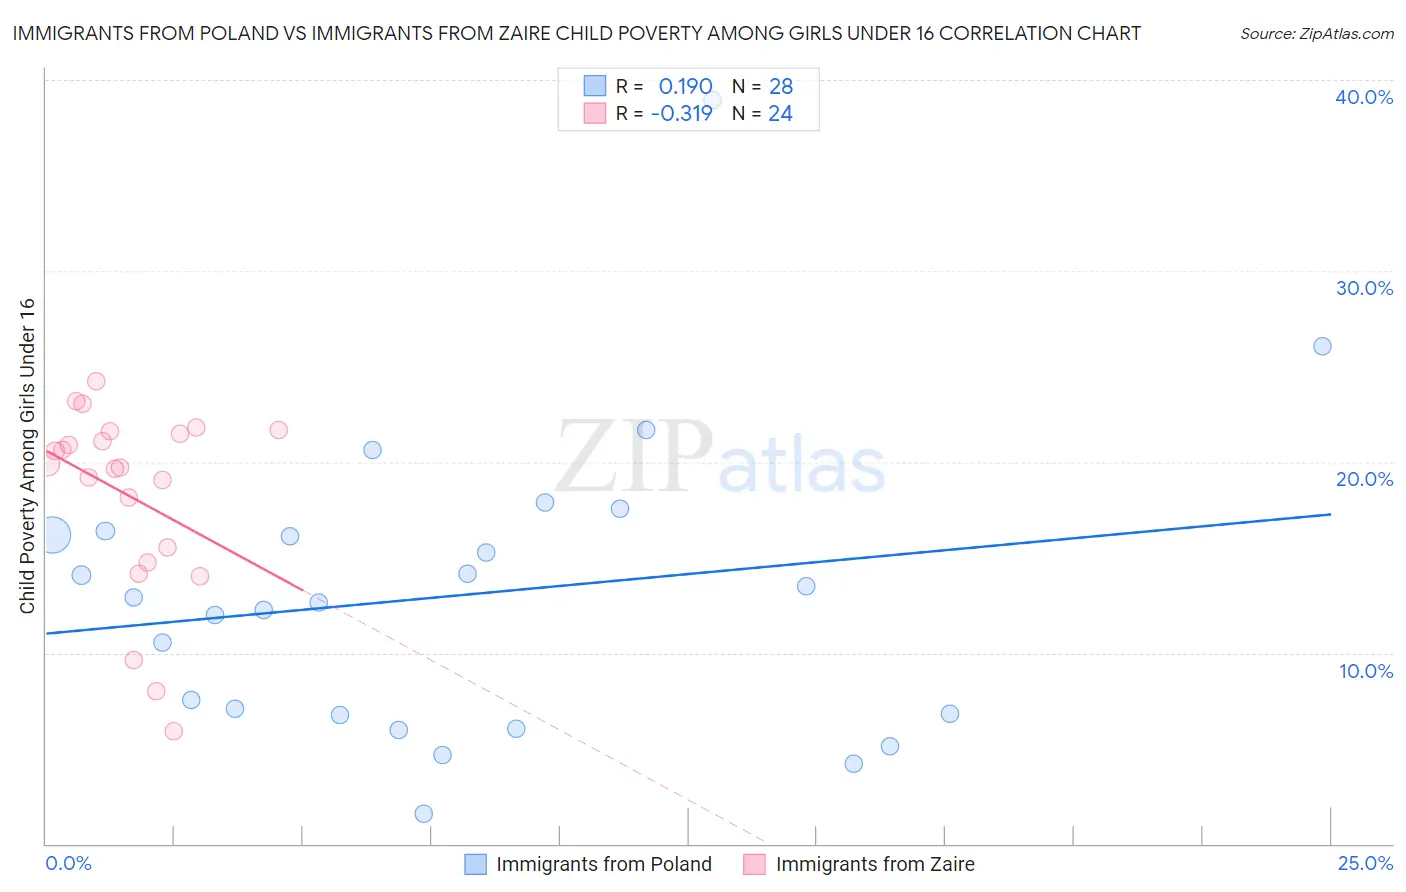 Immigrants from Poland vs Immigrants from Zaire Child Poverty Among Girls Under 16